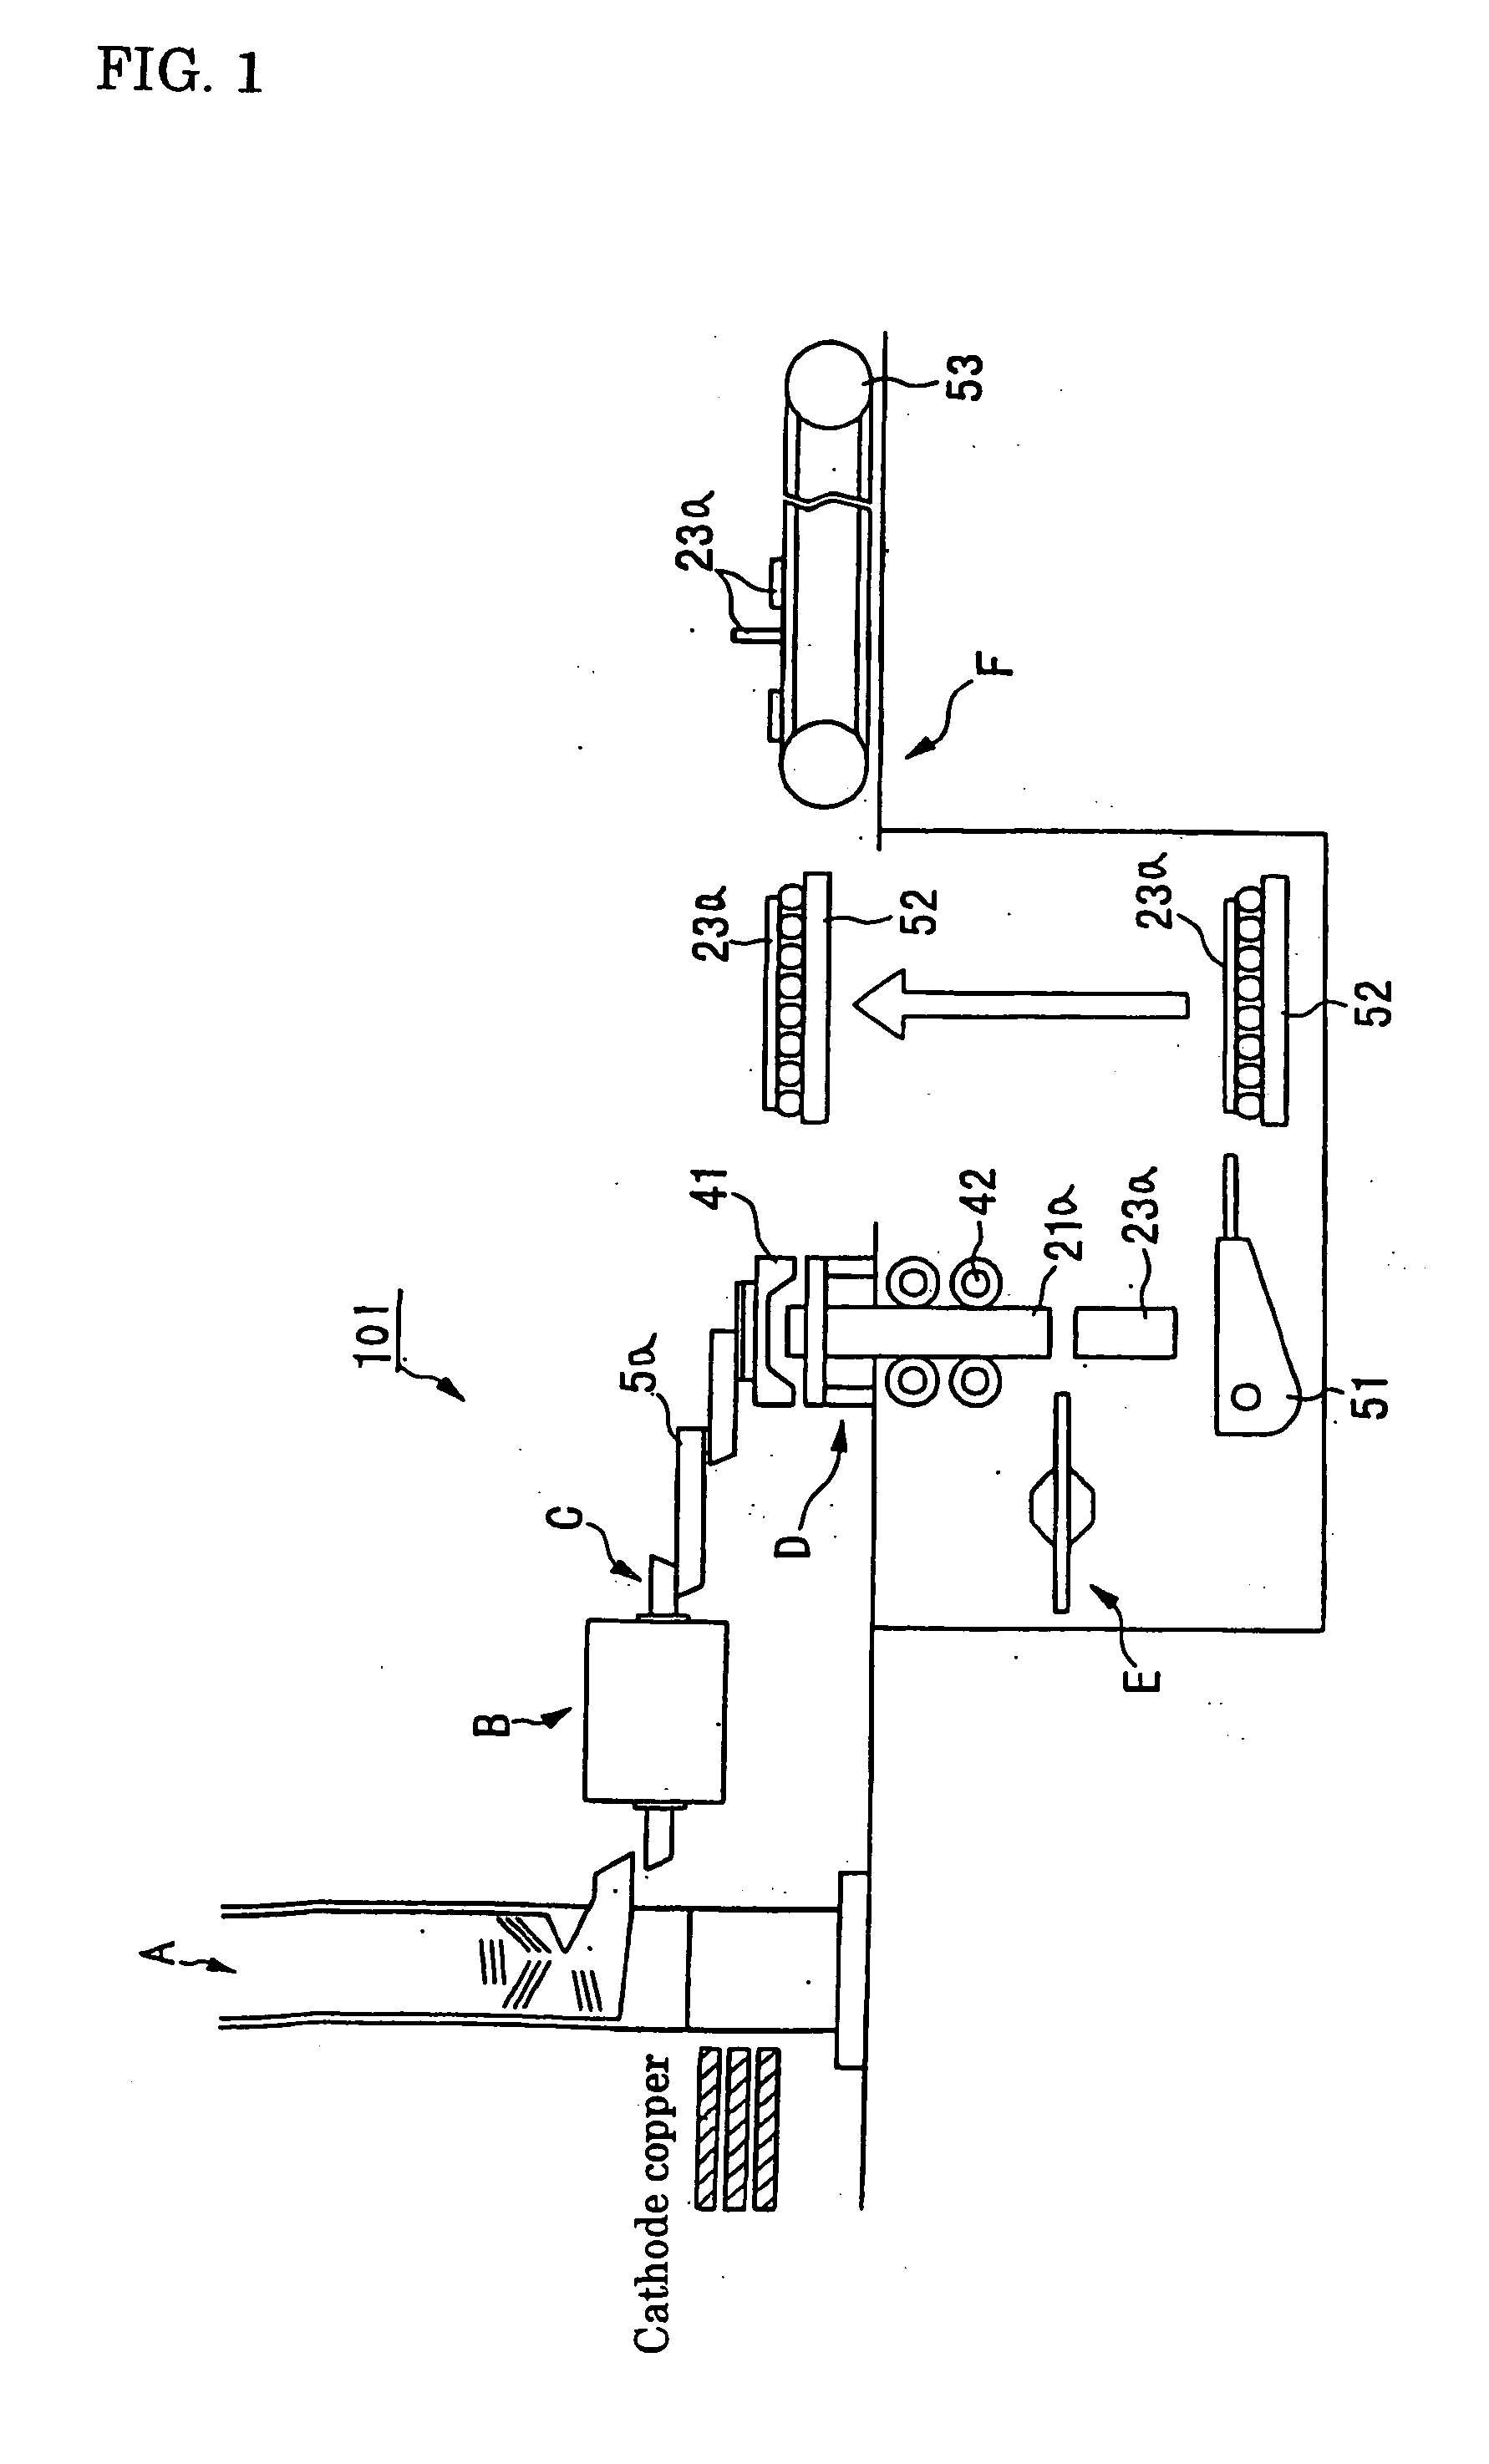 Method for manufacturing low-oxygen copper